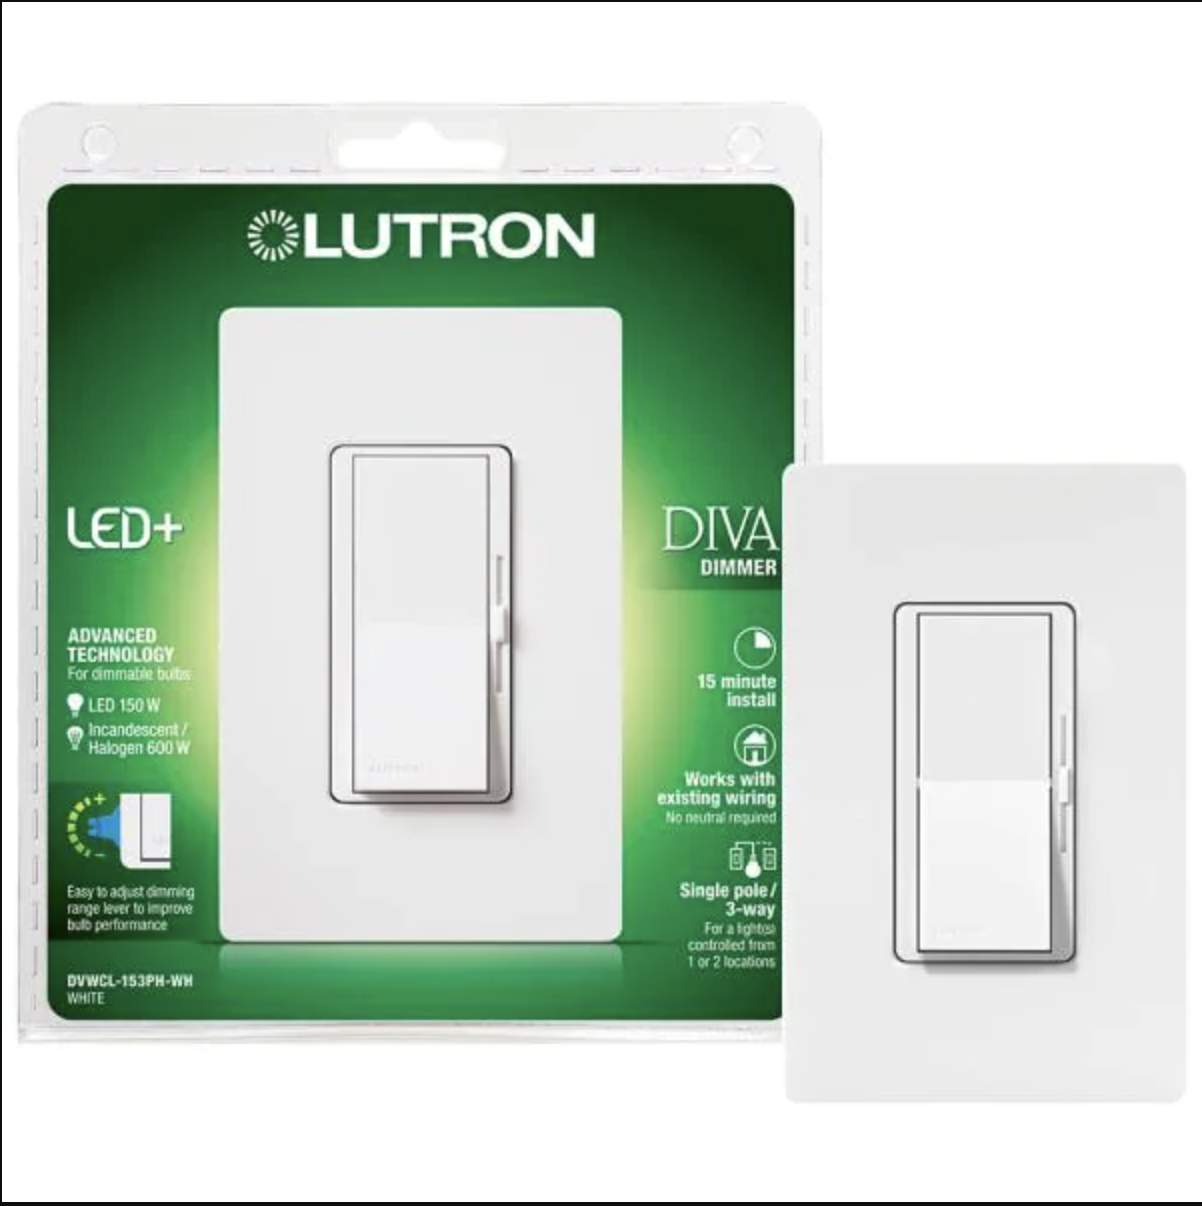 LED+ Dimmer Switch